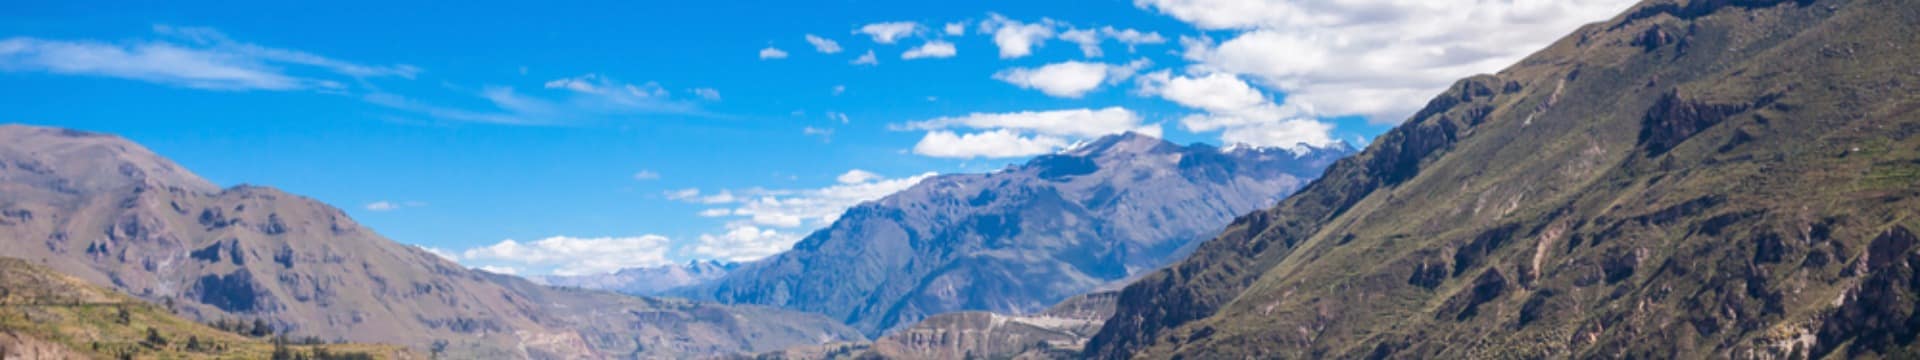 Colca valley is located about 100 kilometers northwest of arequipa peru